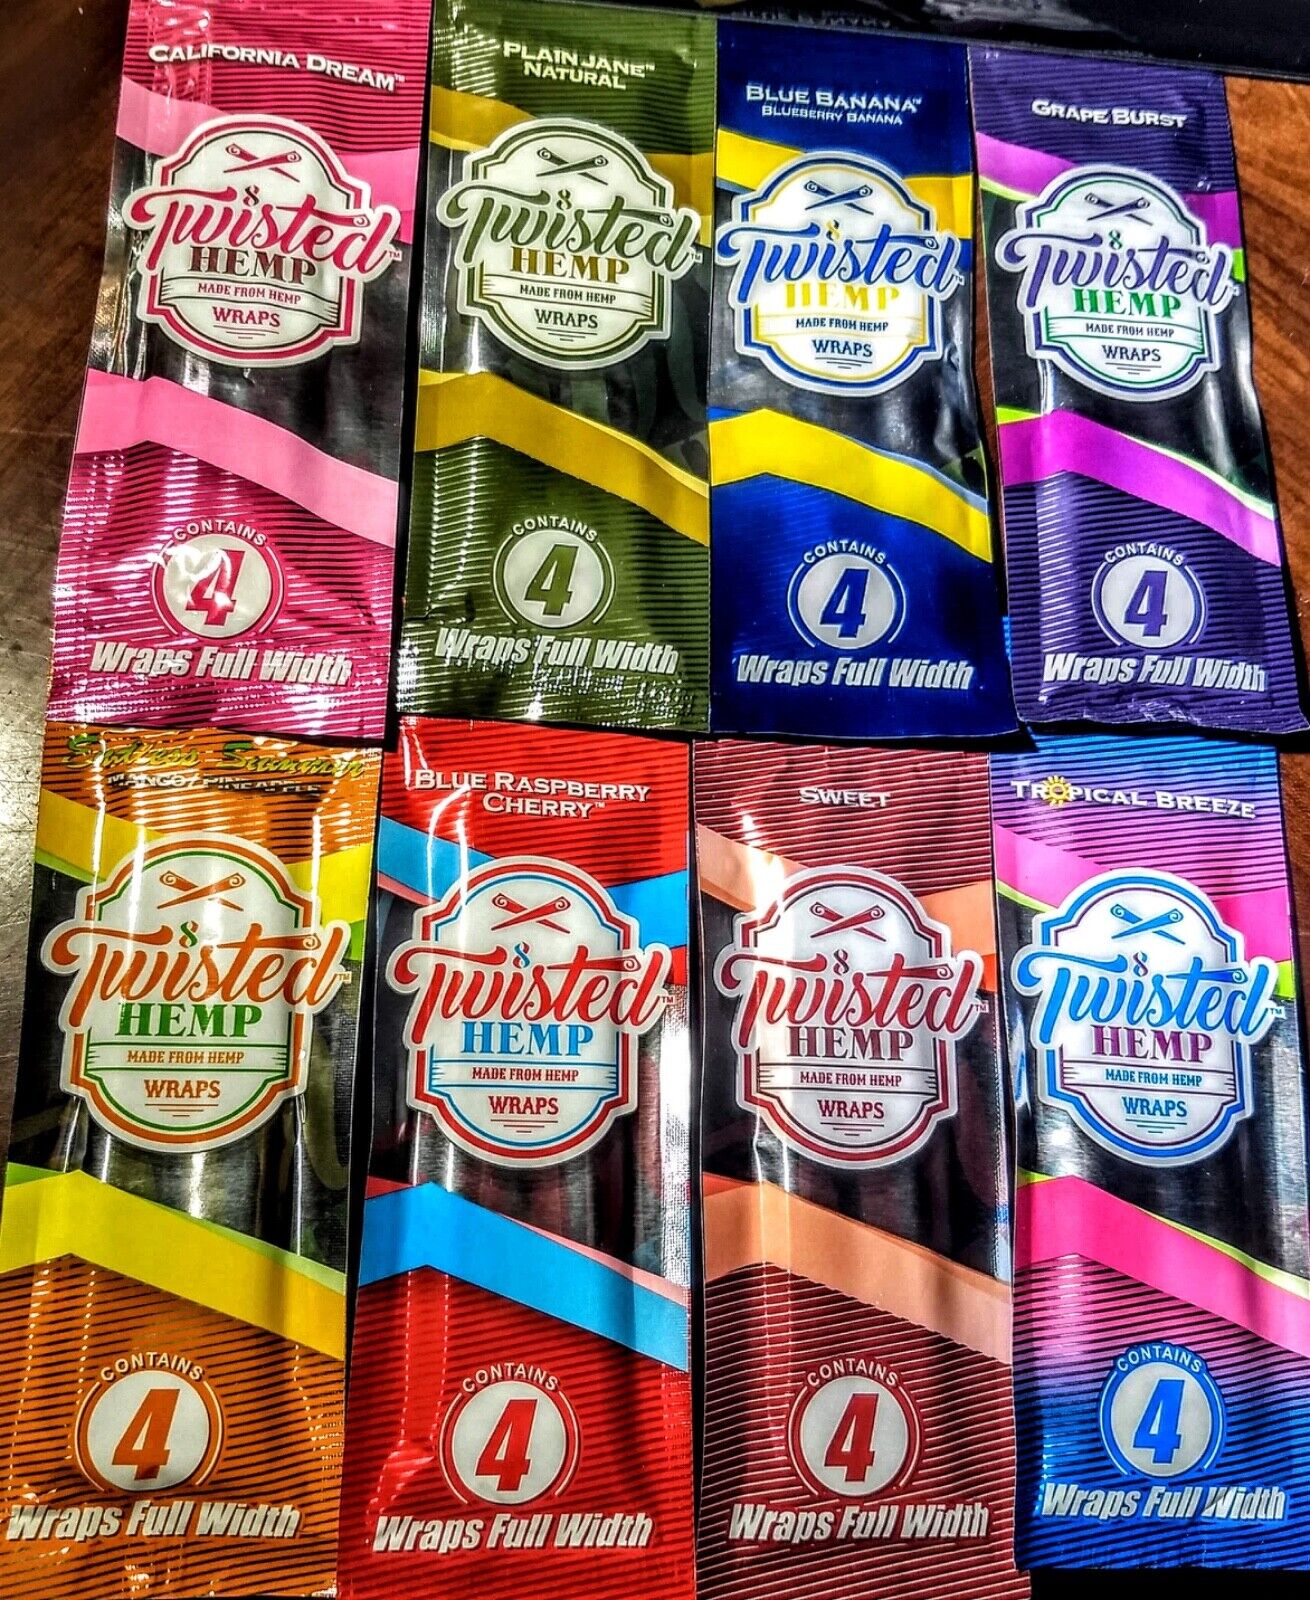 Twisted Flavored Herbal Papers Variety Sampler 8/4ct Packs Twisted